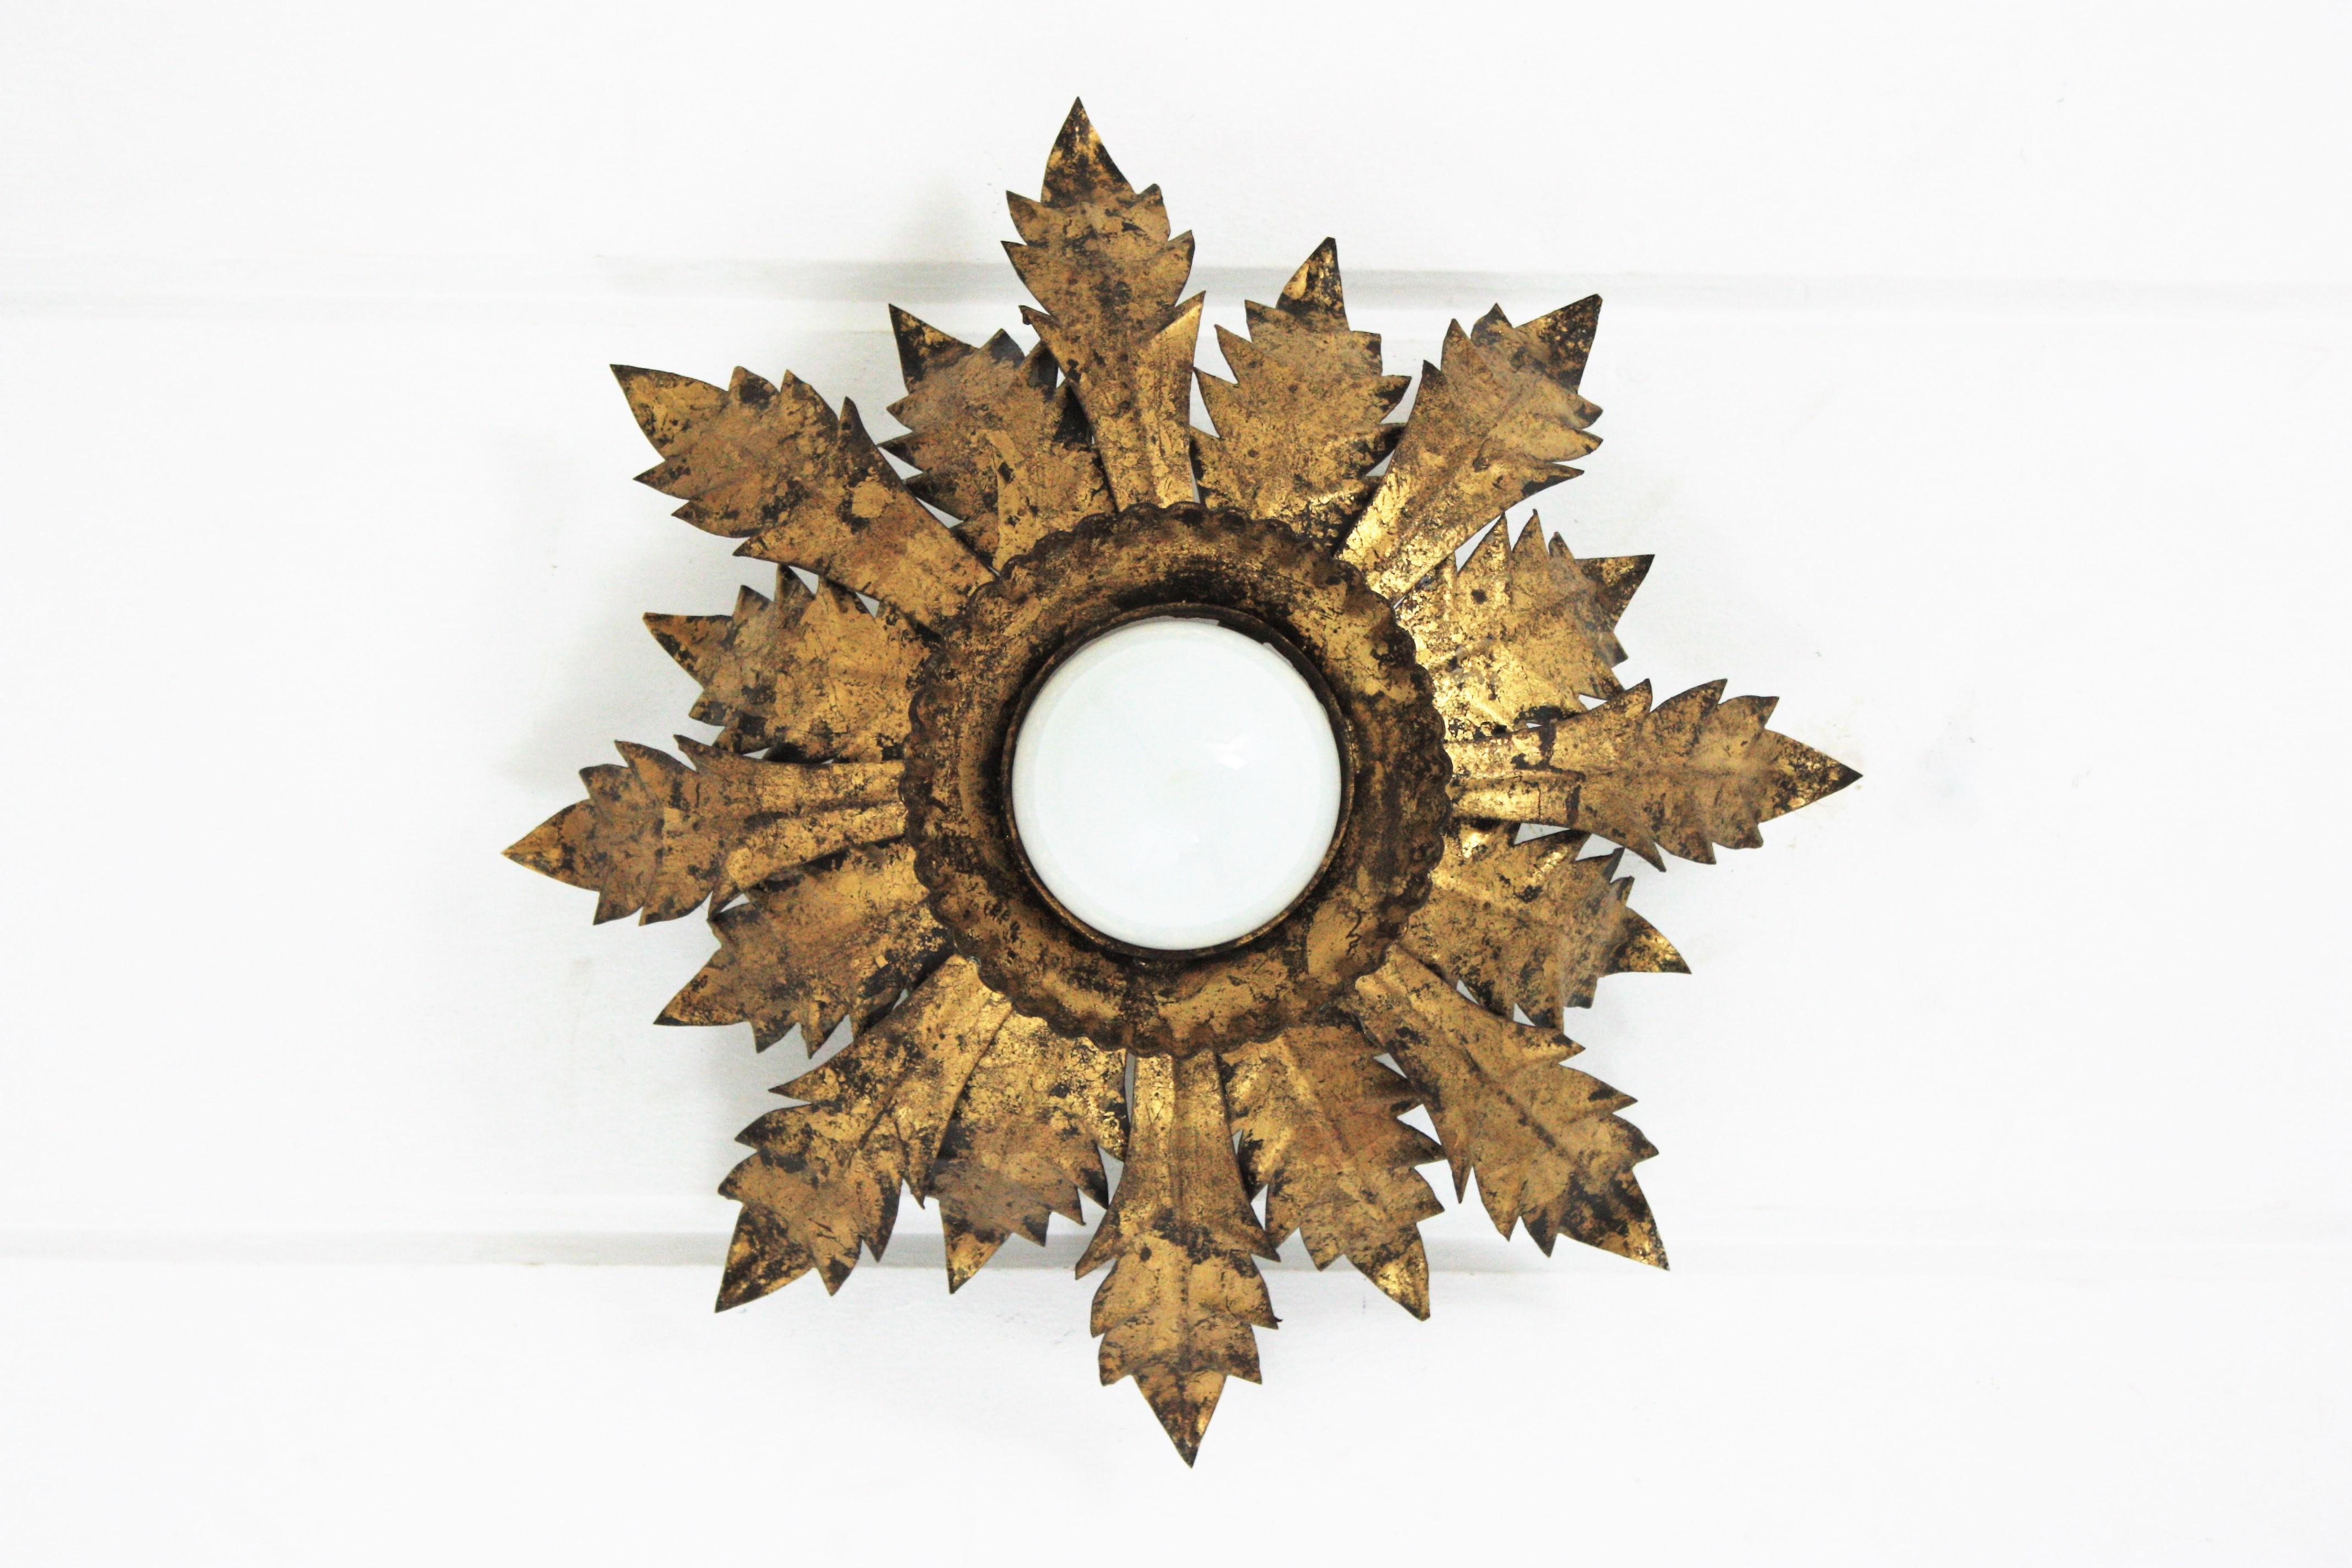 Sunburst flush mount light, metal, gold leaf, Spain, 1950s
This gorgeous spanish sunburst or crown ceiling lamp features alternating gold leaf gilt iron leaves surrounding a central exposed bulb. It has a terrific patina showing its original gold